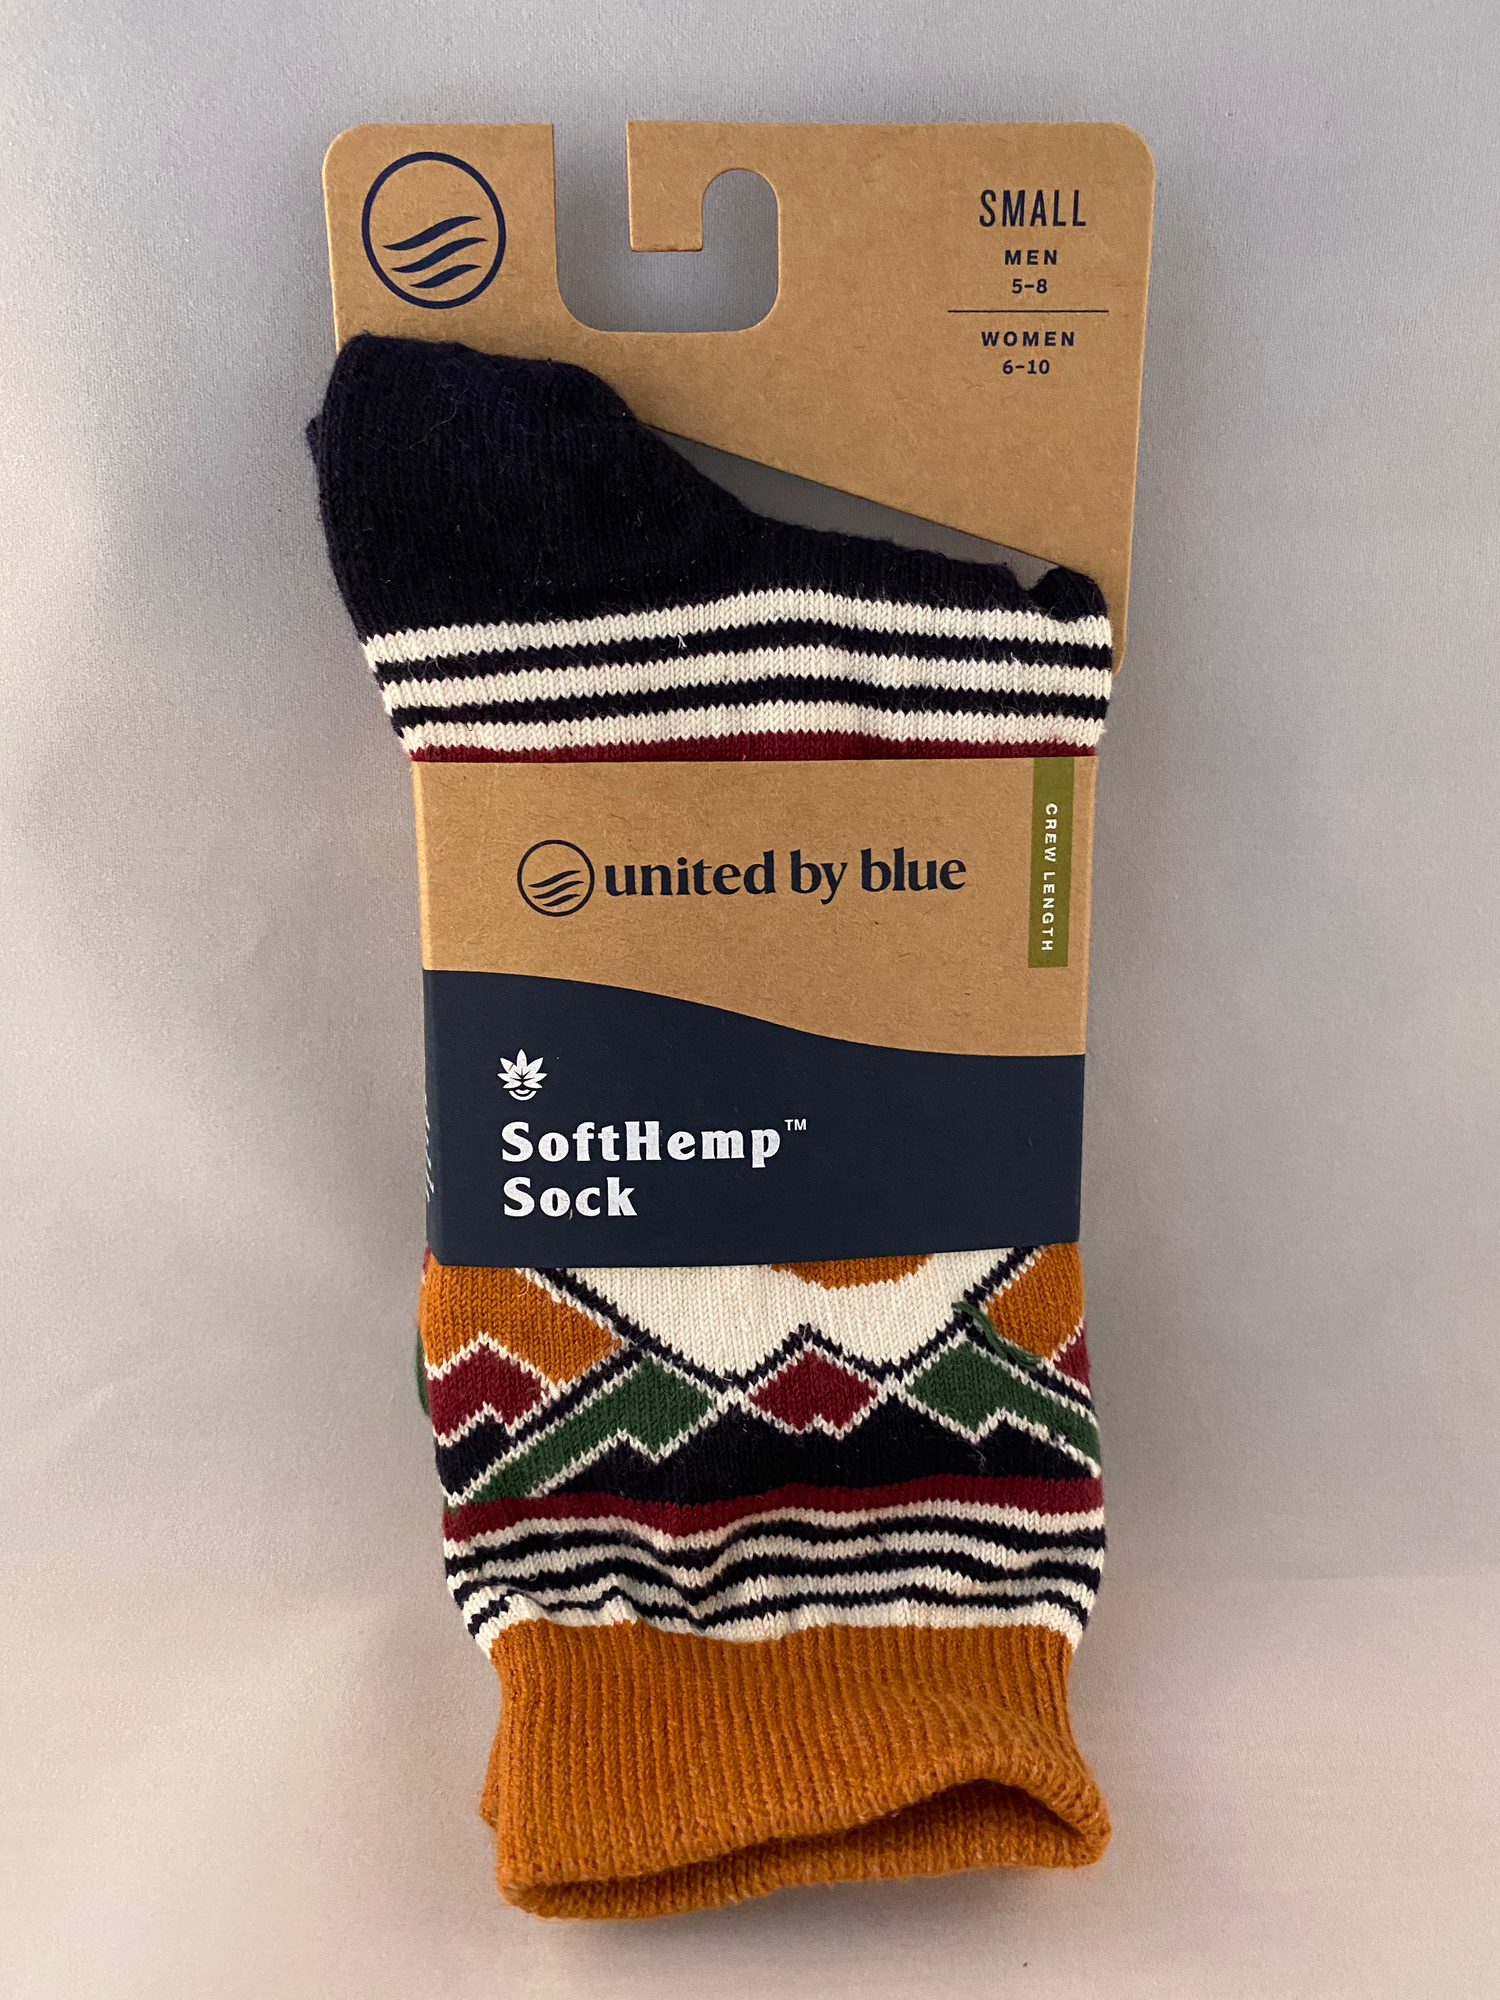 Bison socks in packaging by United by Blue